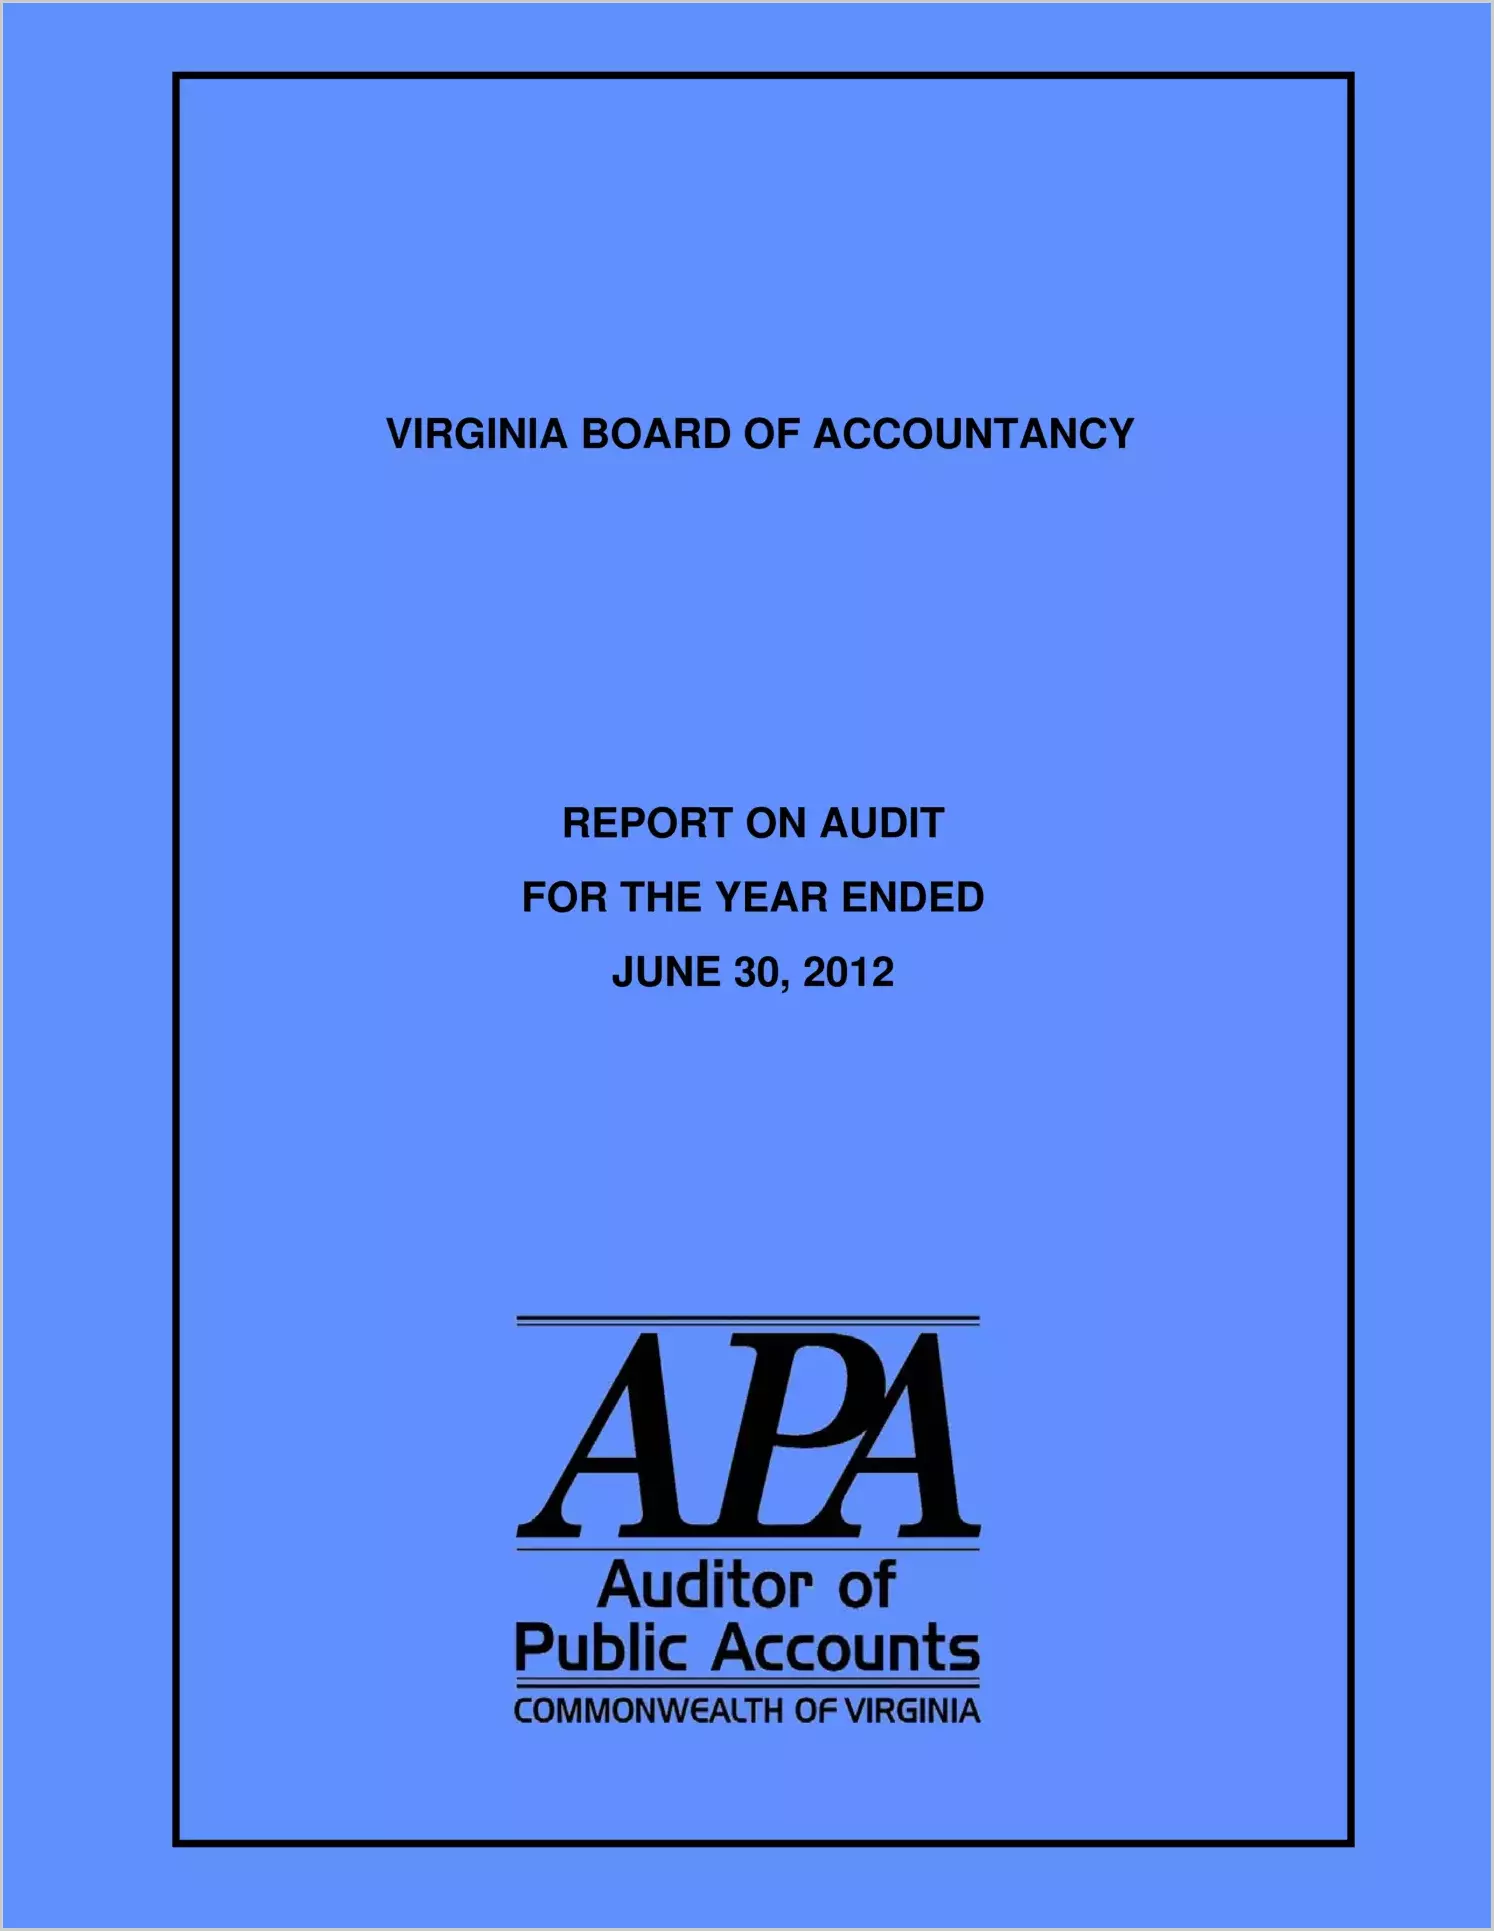 Virginia Board of Accountancy for the year ended June 30, 2012